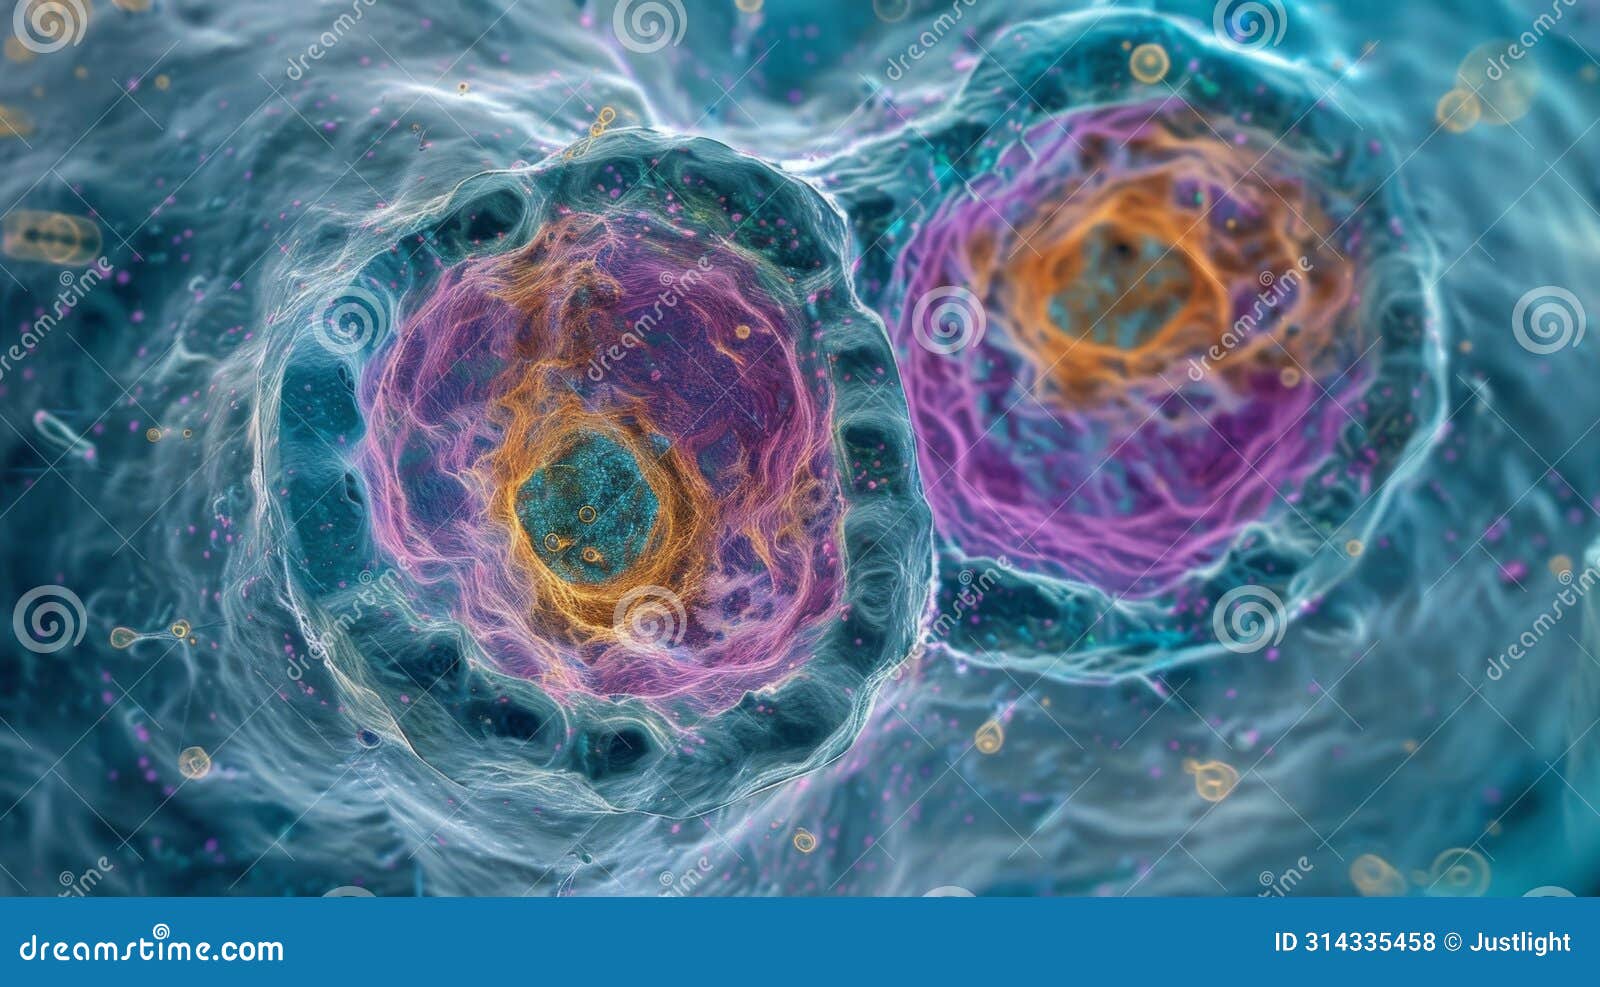 the centrioles of an animal cell are visible in this image shown as two cylindrical structures within the cytoplasm that